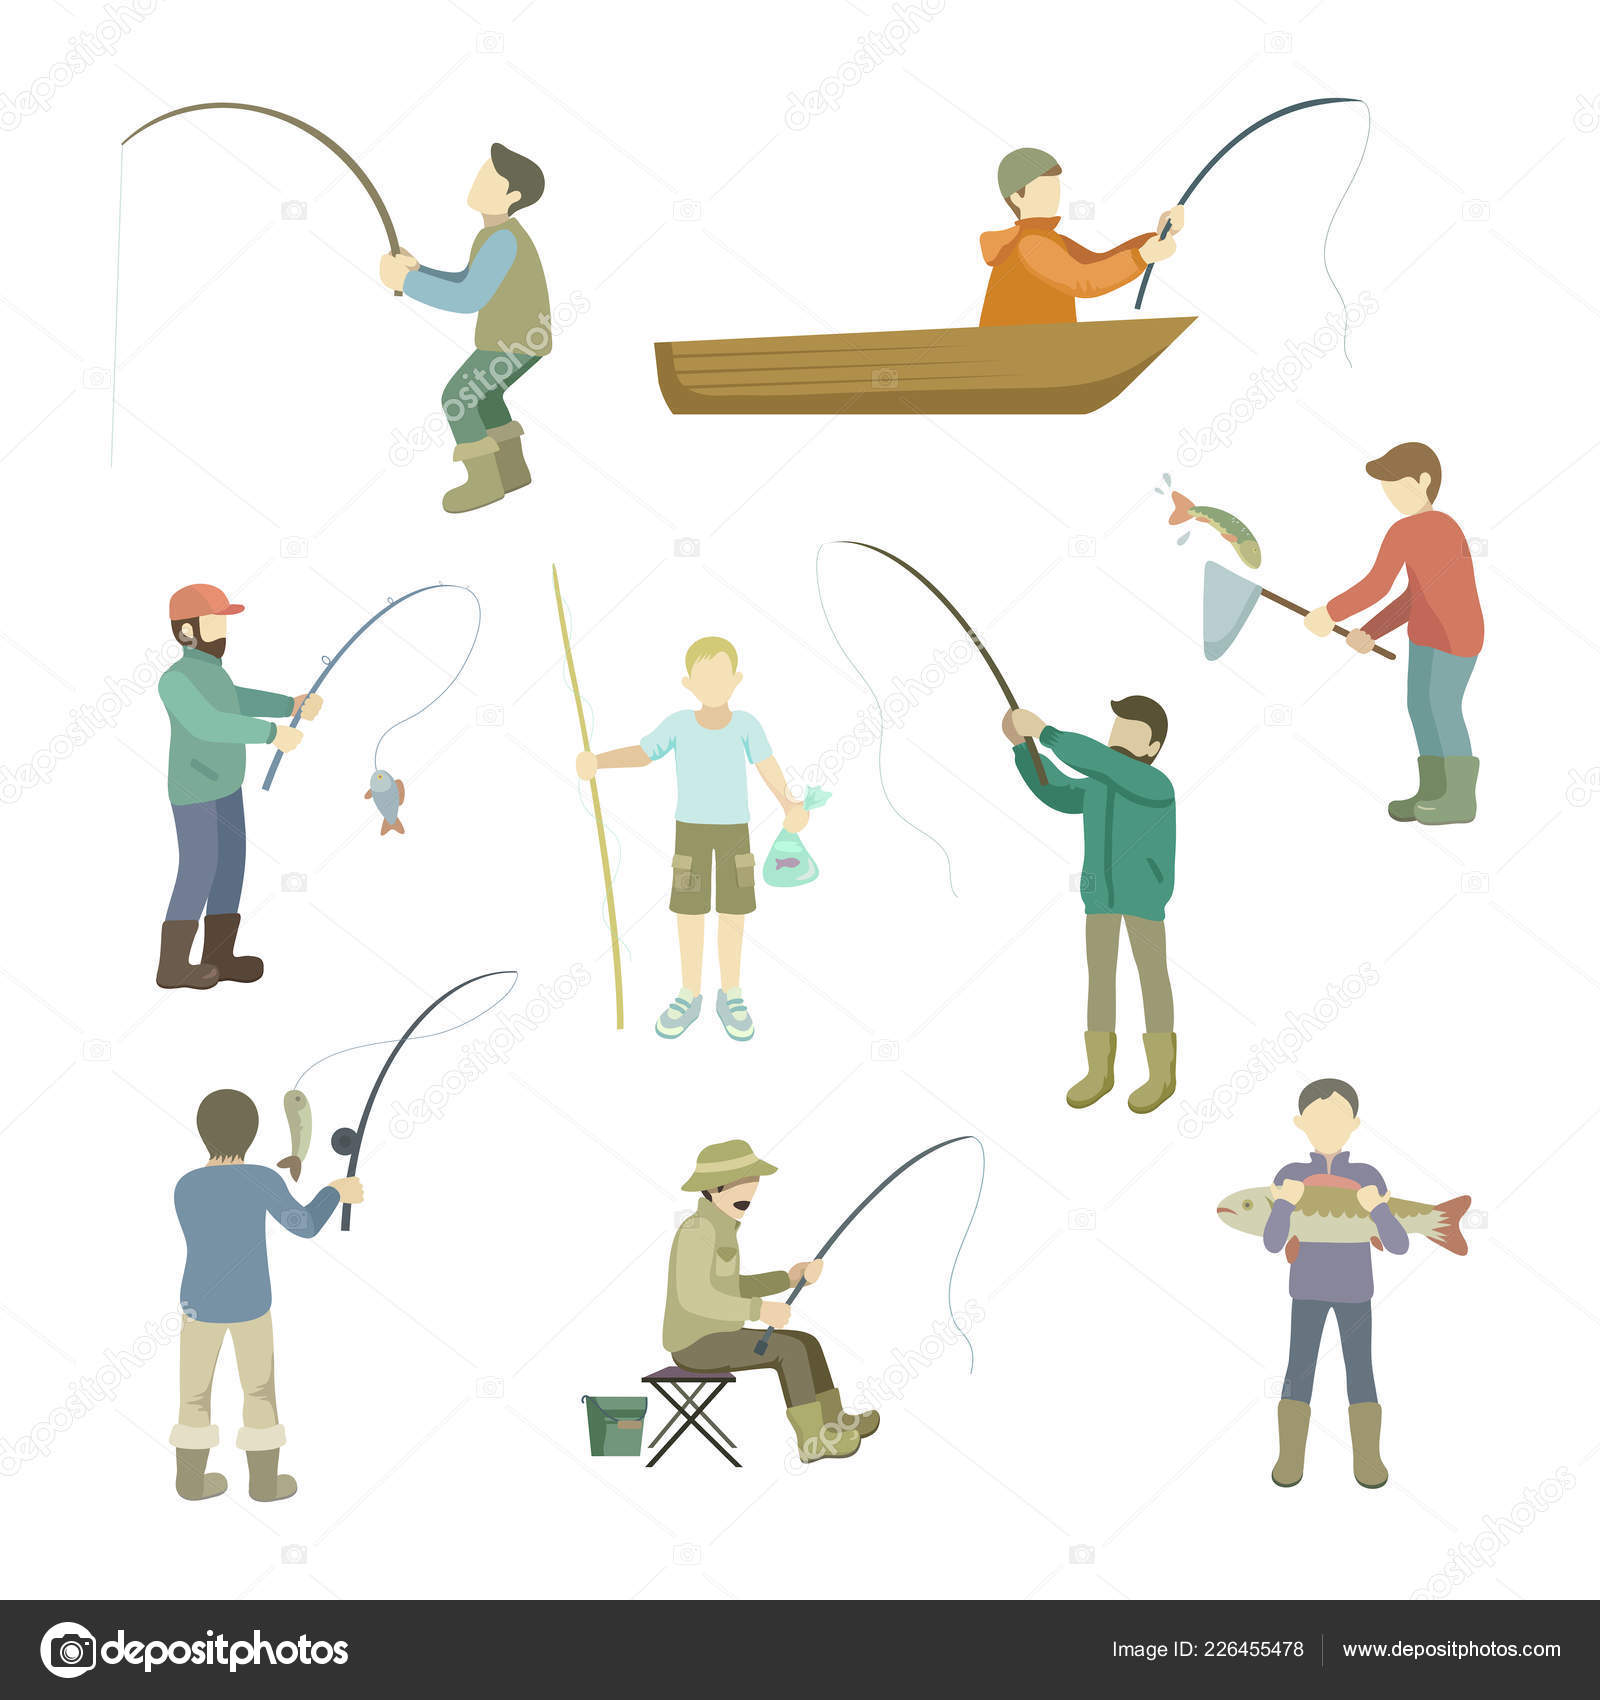 Fishermen spend time fishing. Fish in a boat, casting fishing rods